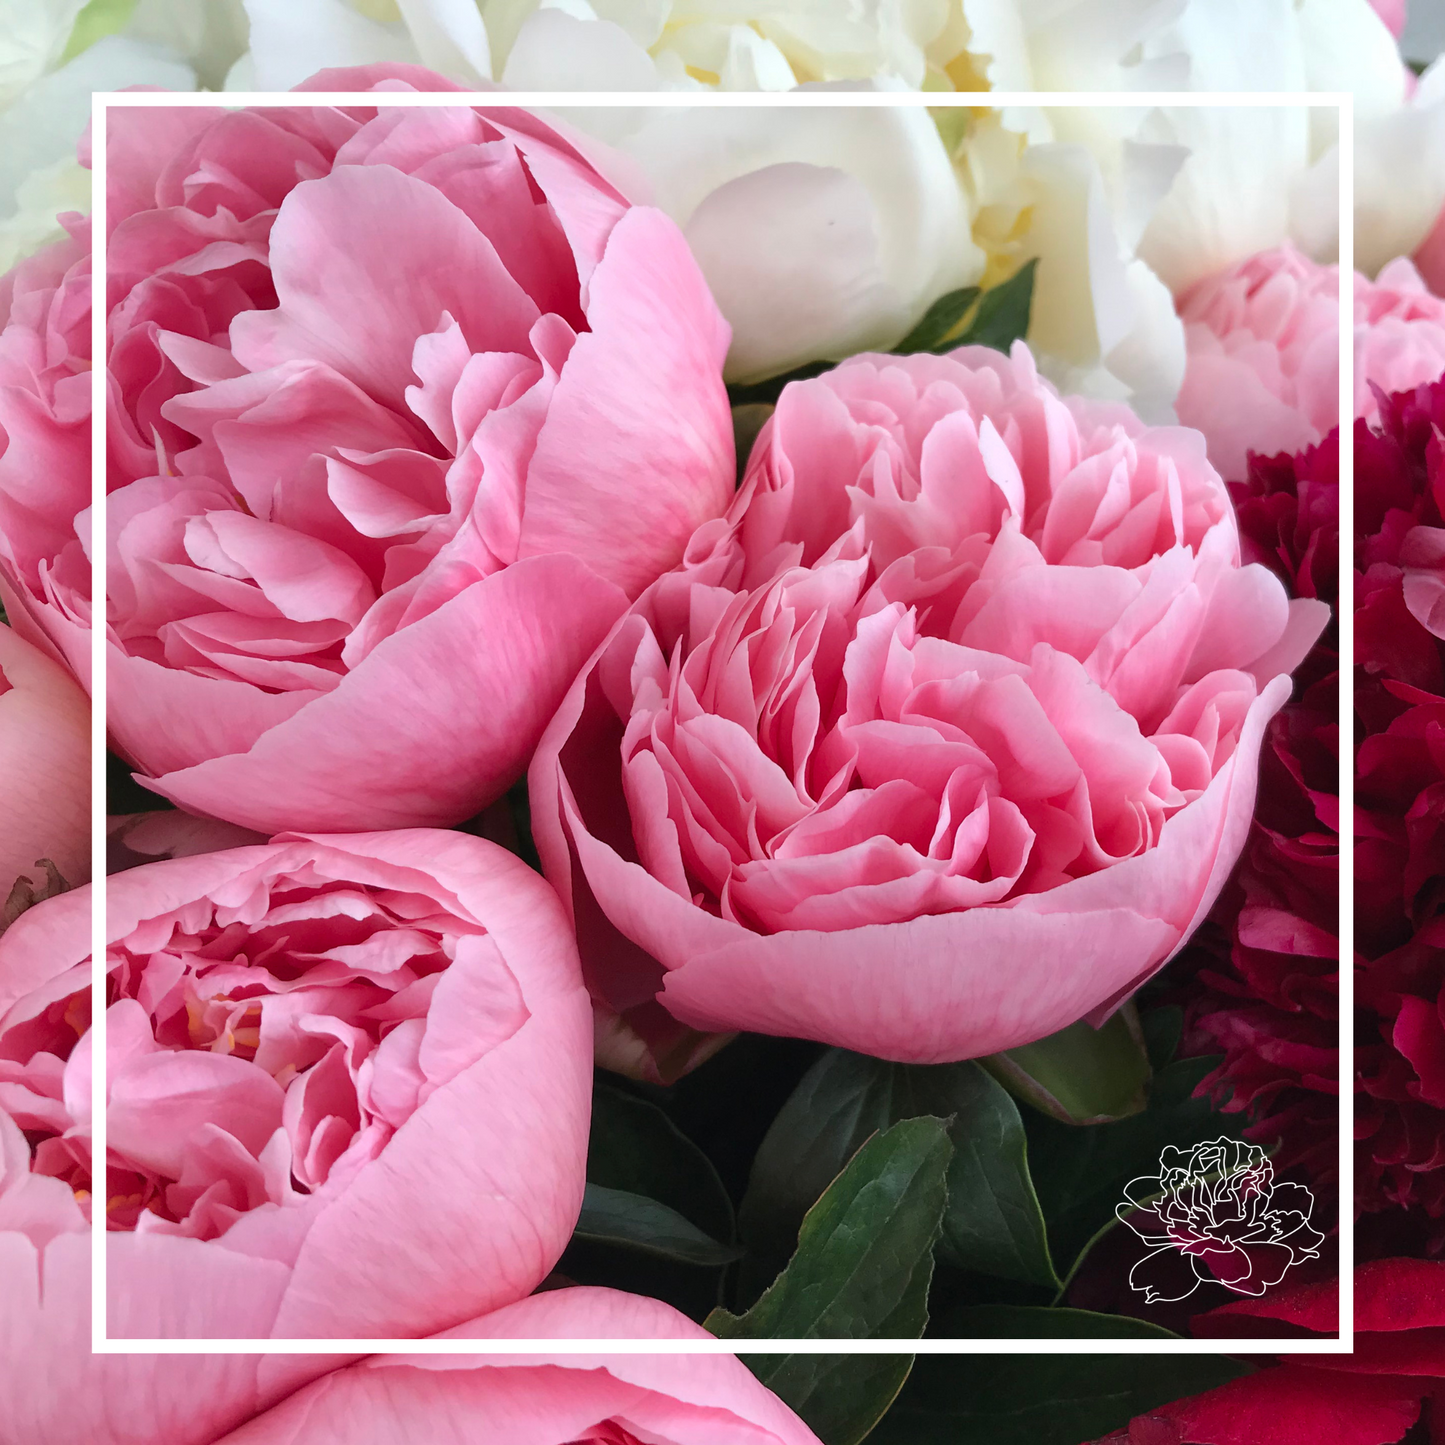 several Beautiful pink Etched Salamon peony roses in full bloom, with layers of delicate petals. surrounded by foliage and other varieties. Framed with a white graphic and the prebbleton peonies logo in the bottom right corner. 